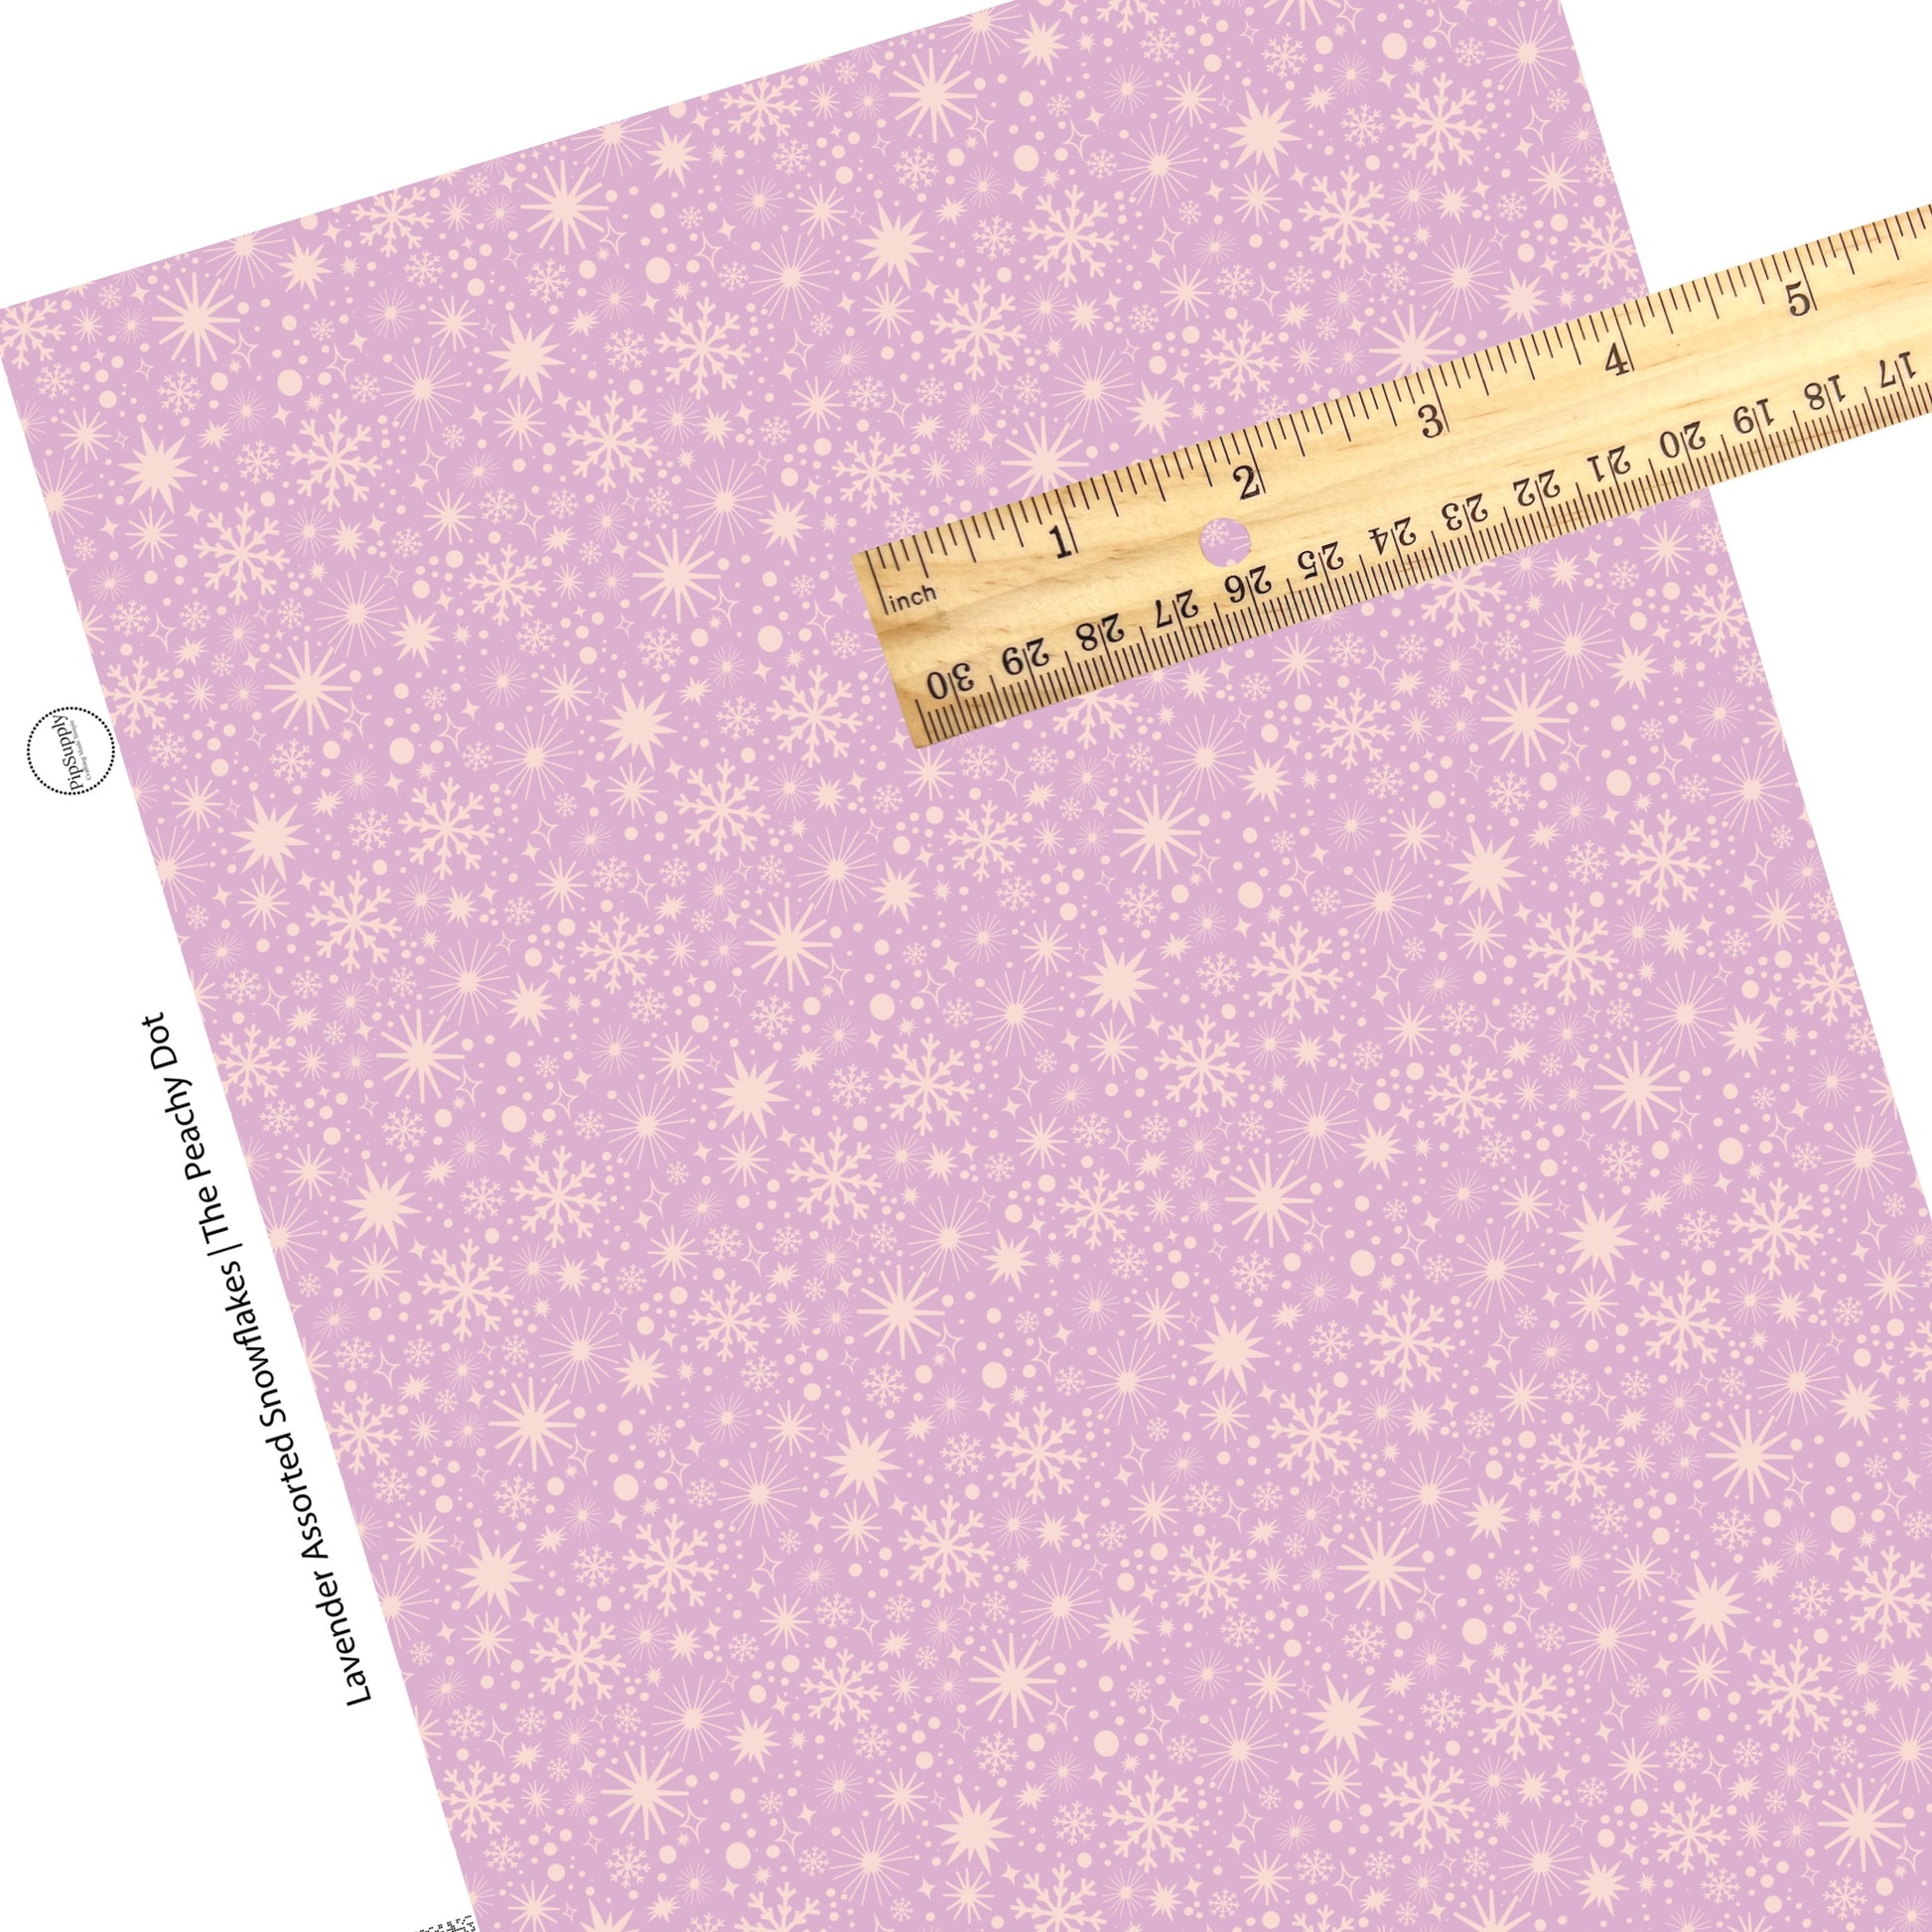 Scattered light purple snowflakes on lavender faux leather sheets